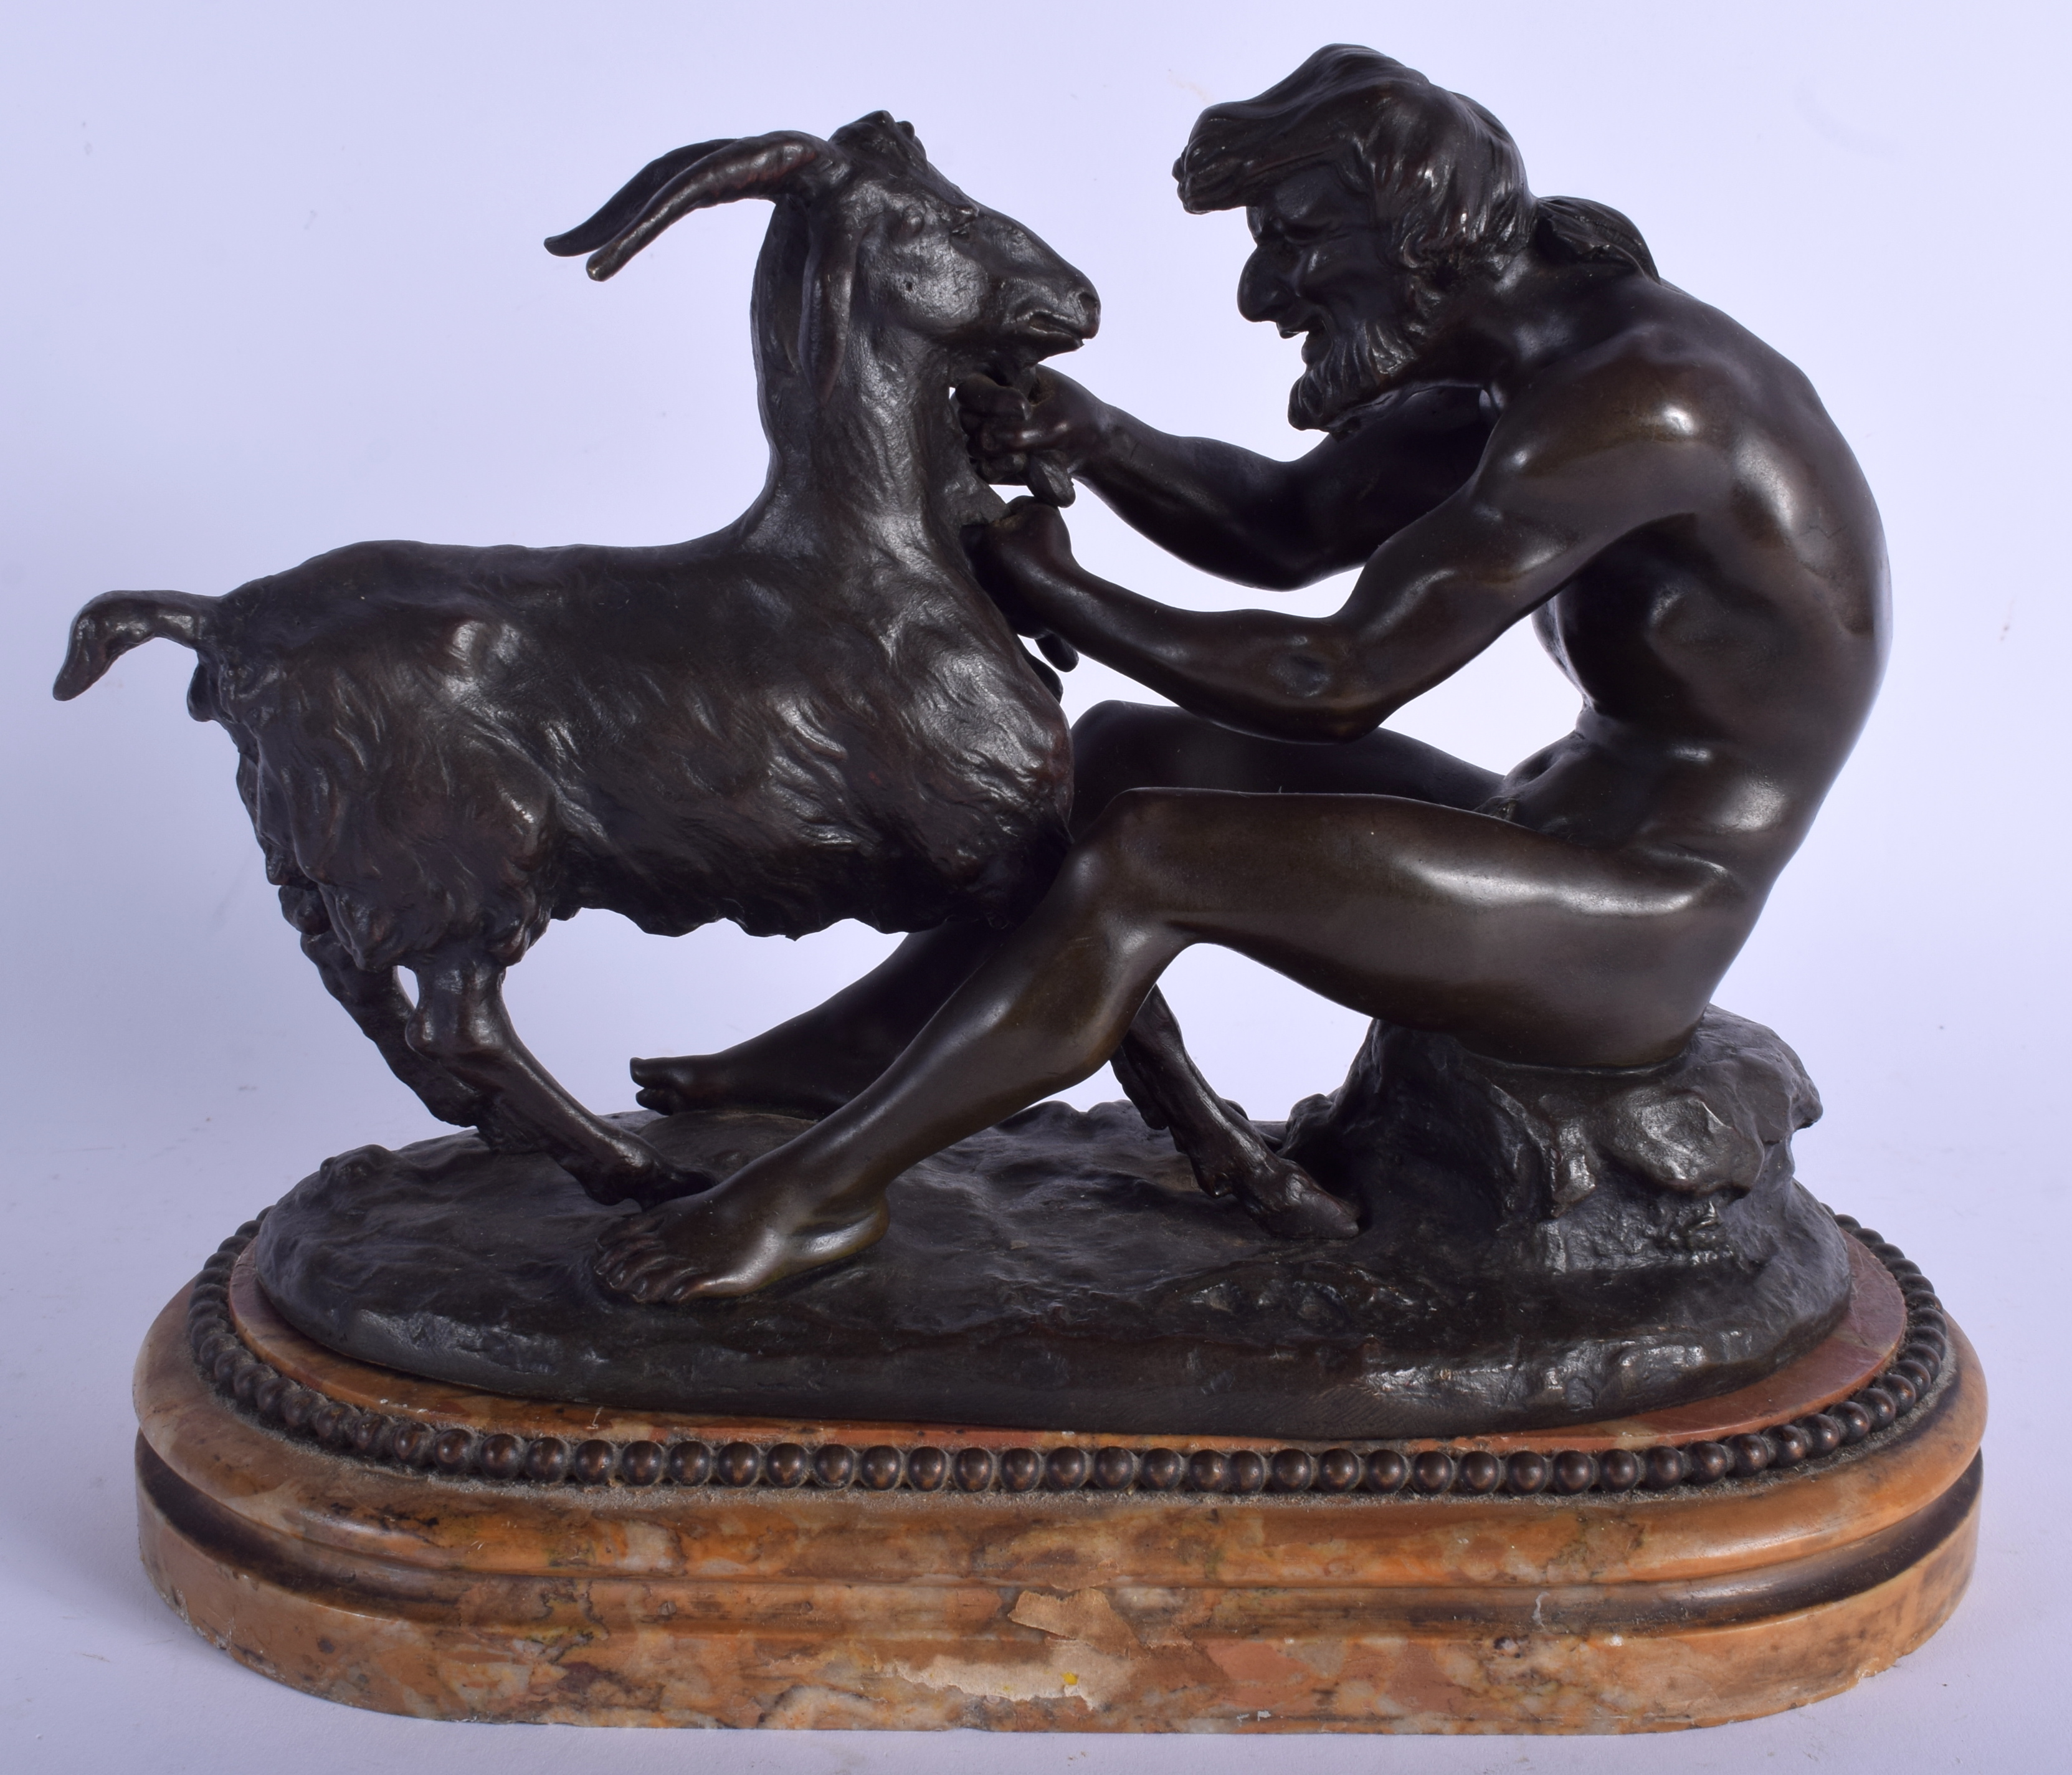 A 19TH CENTURY EUROPEAN BRONZE FIGURE OF PAN AND A GOAT modelled upon a sienna marble base. 24 cm x